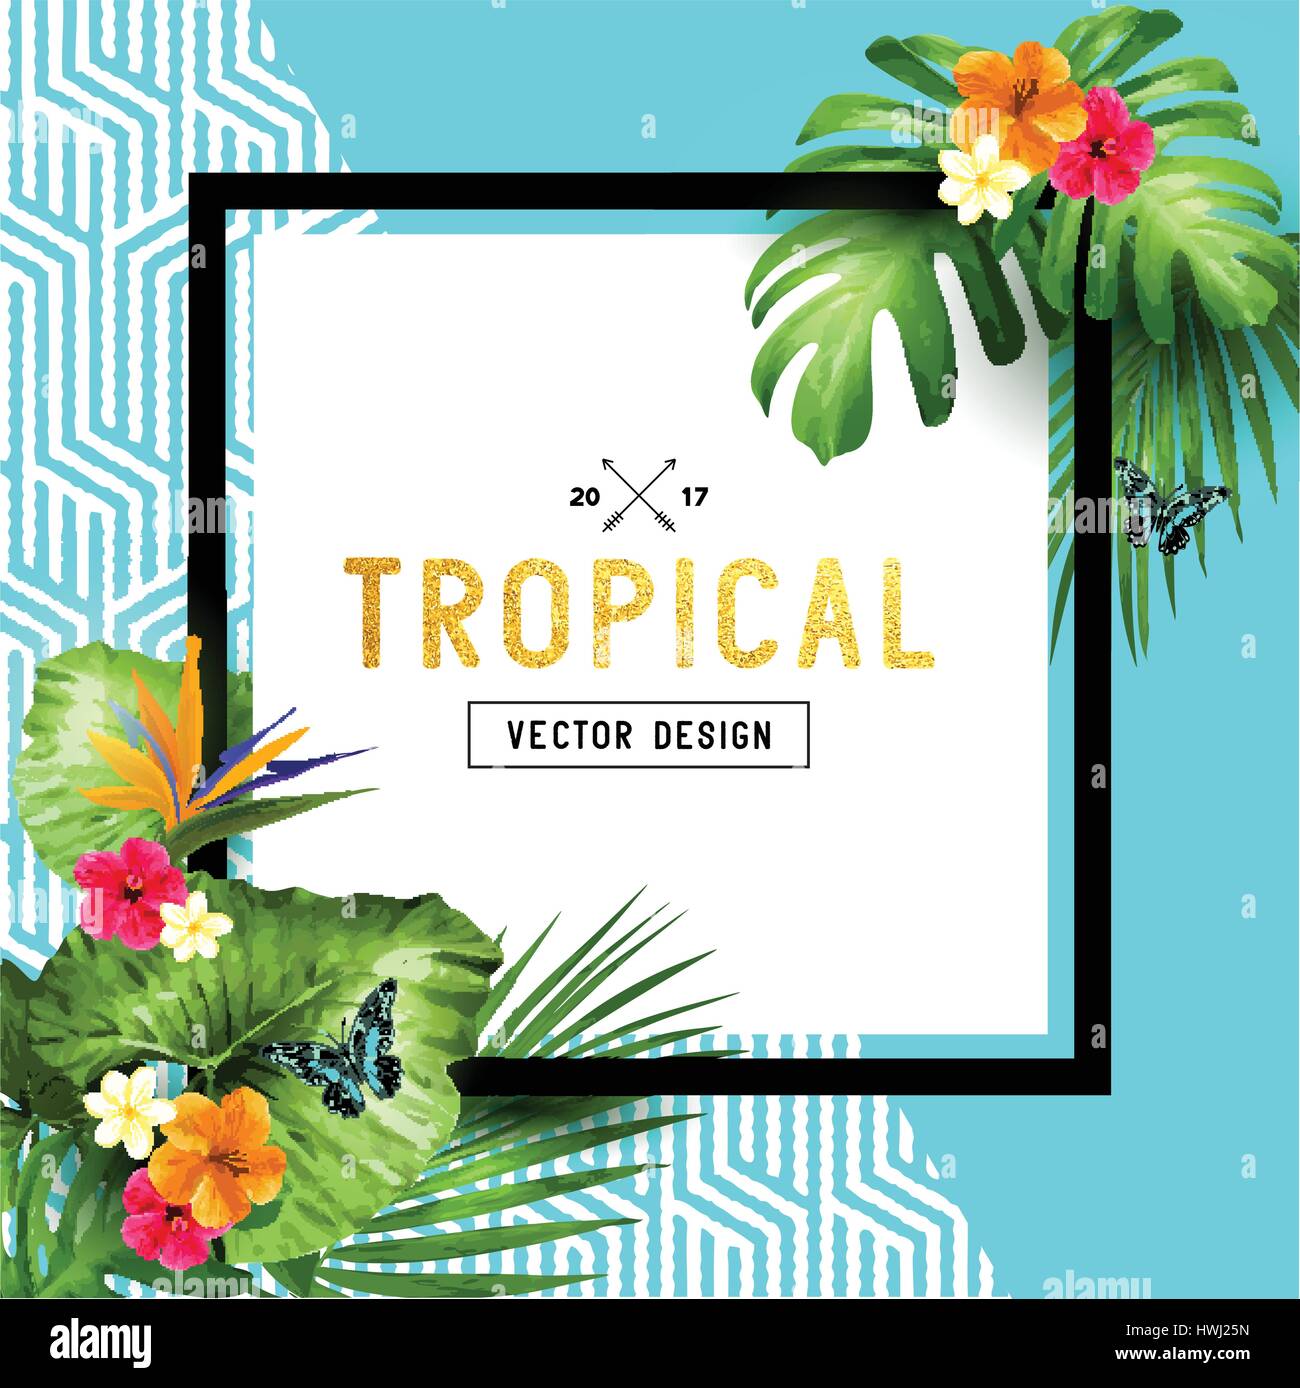 Colourful and vibrant tropical border design with flowers, palm leaves and butterflies. Vector illustration Stock Vector